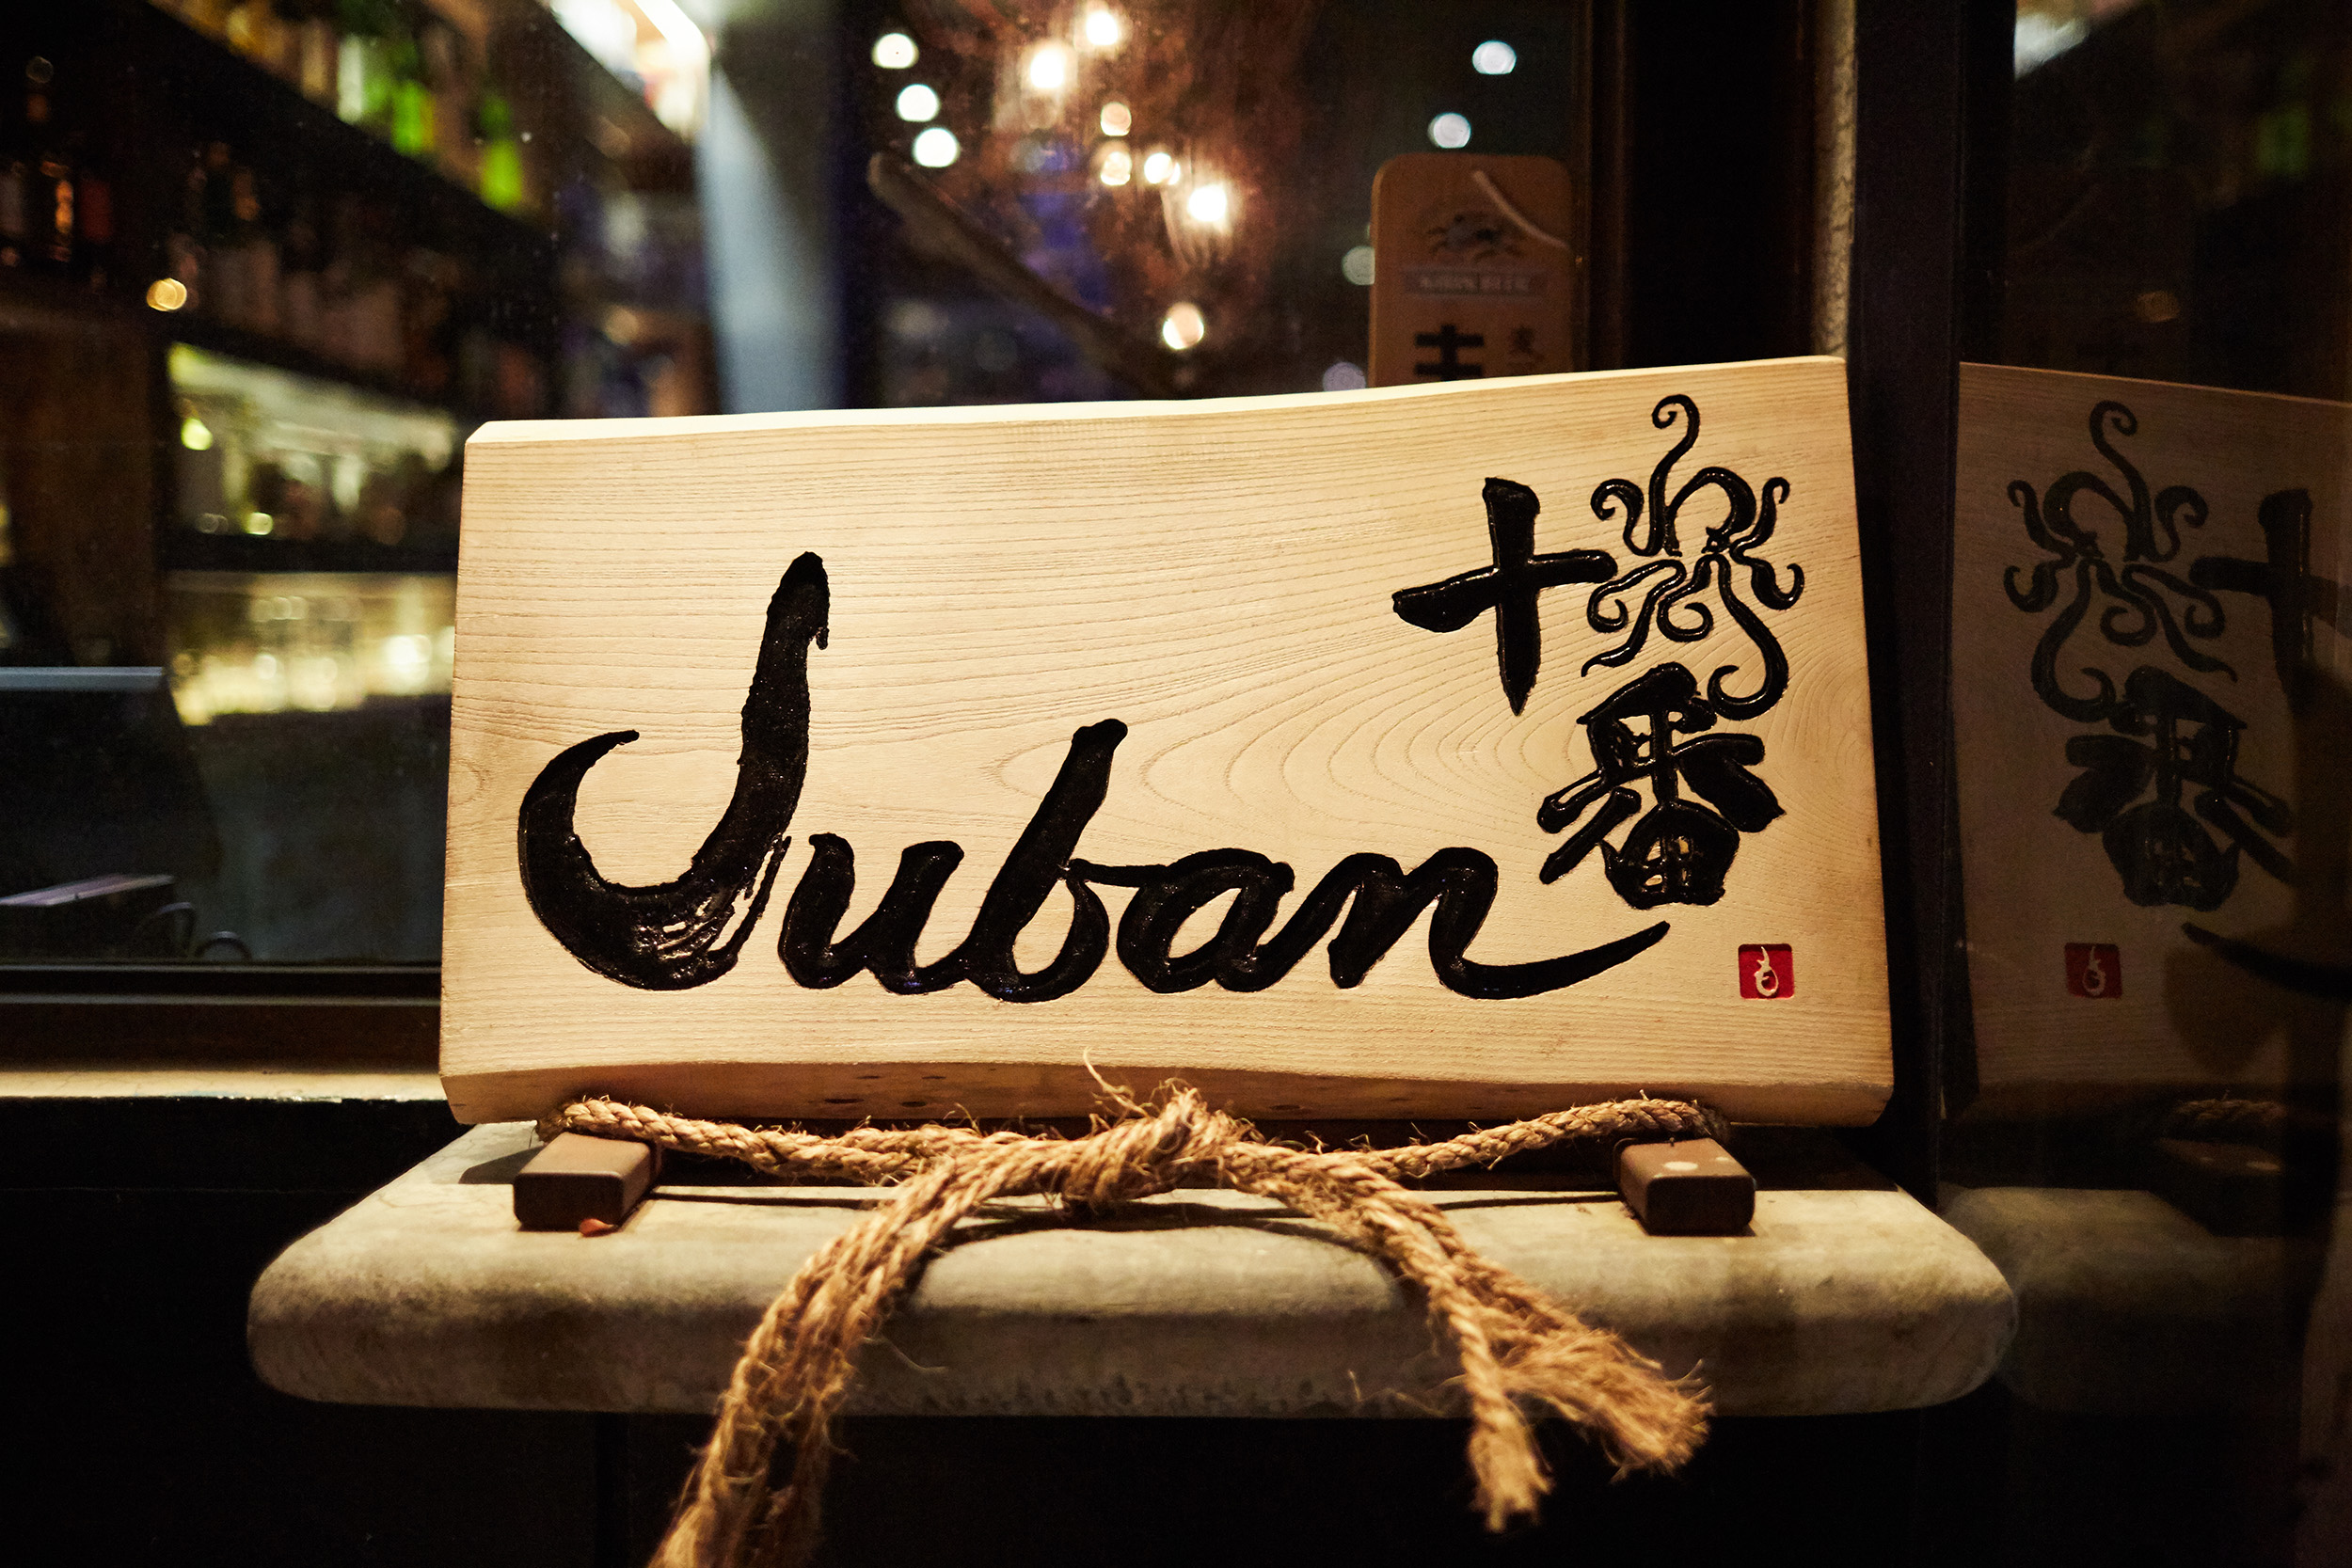  hand carved wooden sign with Juban logo 